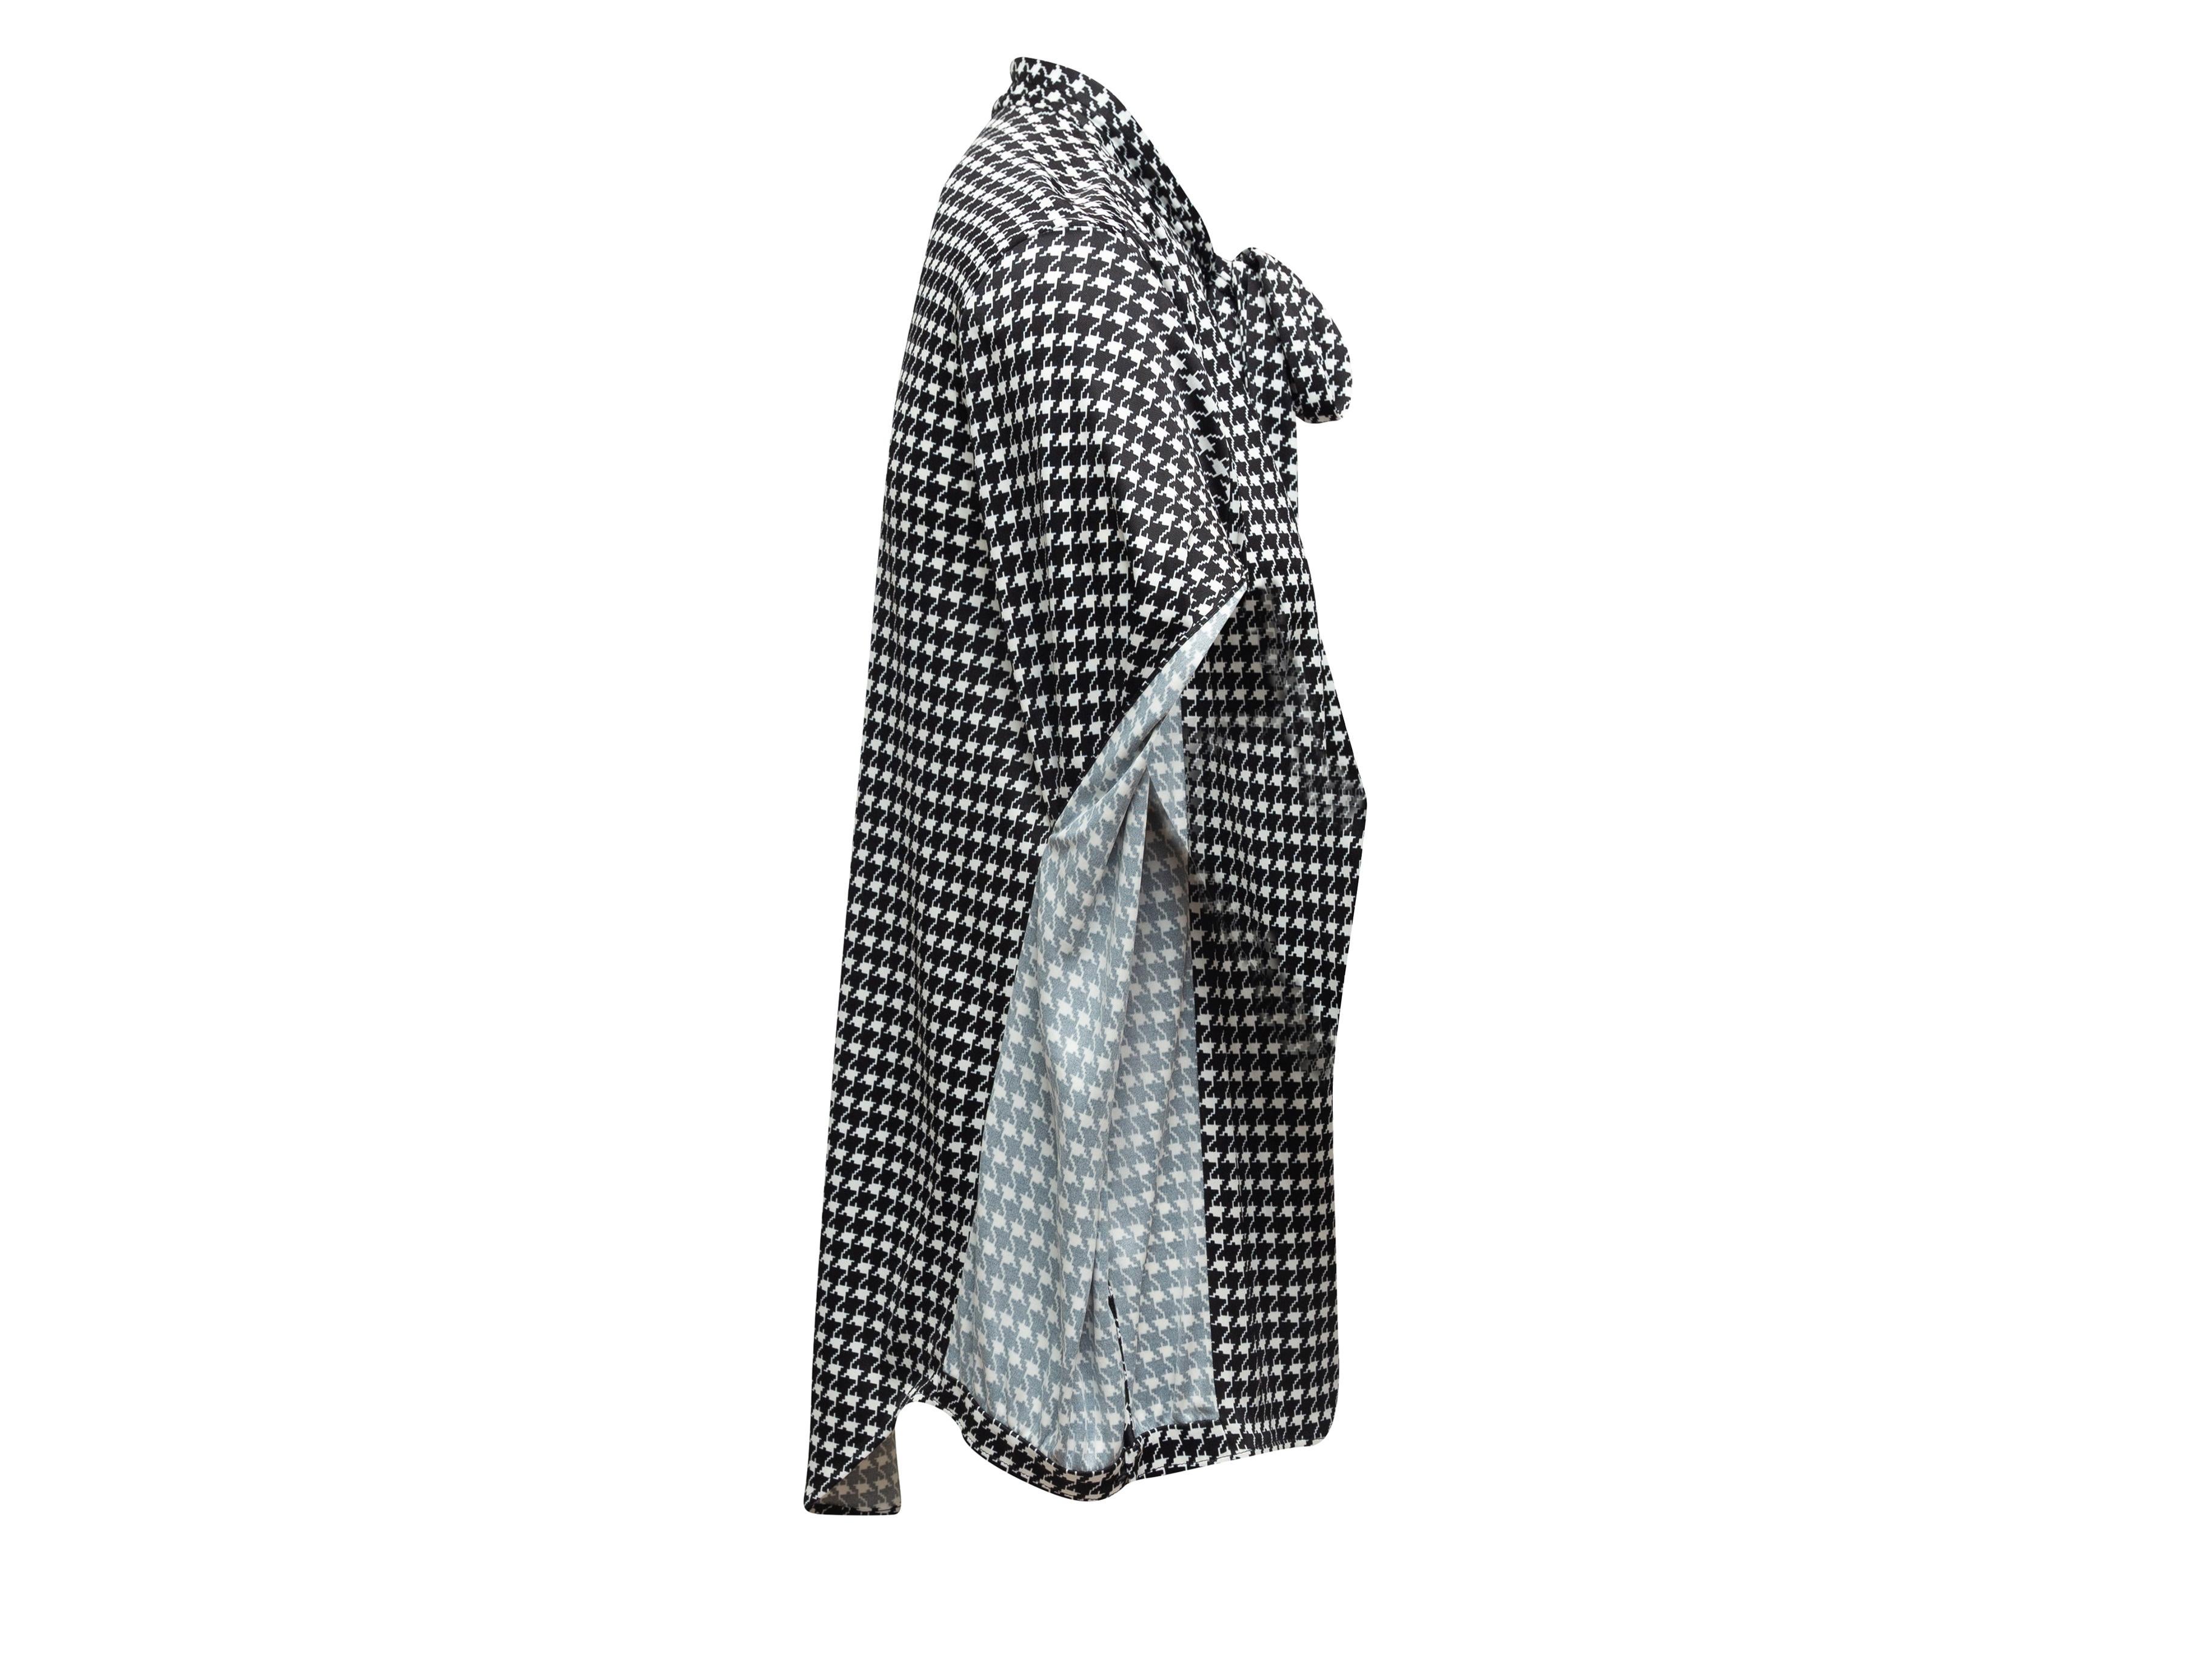 Product details: Black and white long sleeve blouse by Balenciaga. Houndstooth print throughout. Pussy bow tie at neck. Button closures at center front. Designer size 36. 32